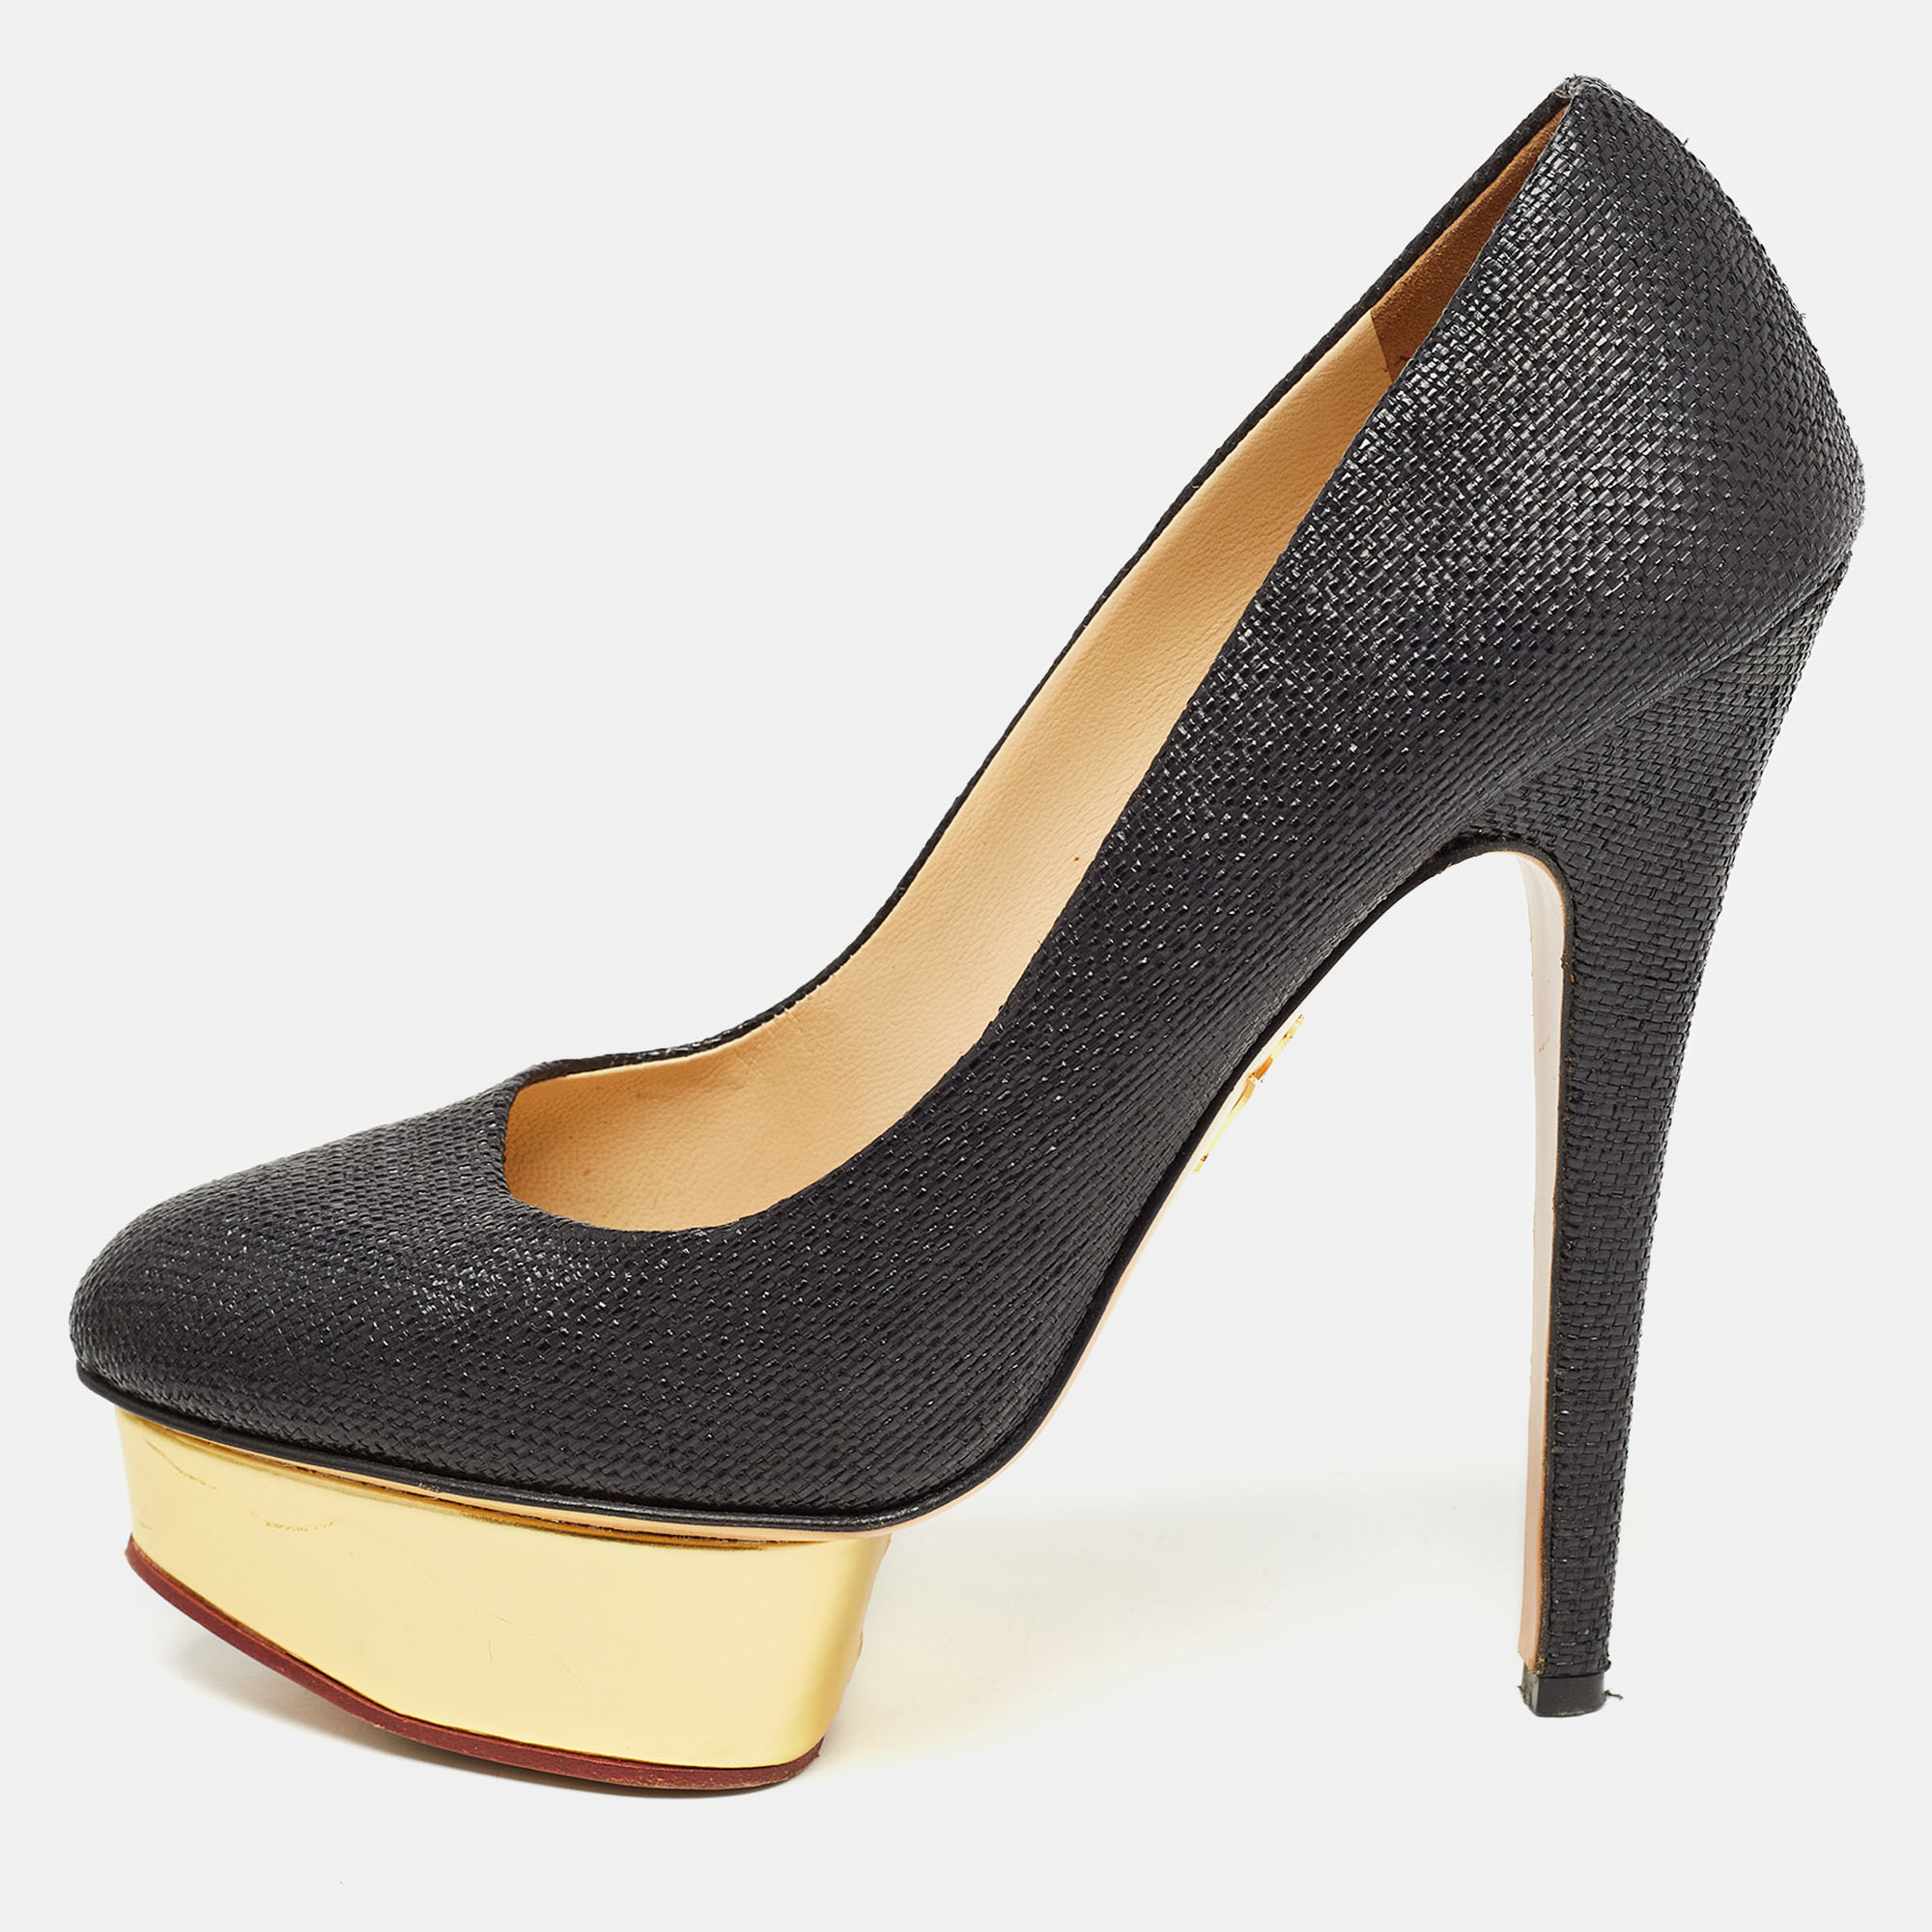 Pre-owned Charlotte Olympia Black Raffia Dolly Pumps Size 39.5